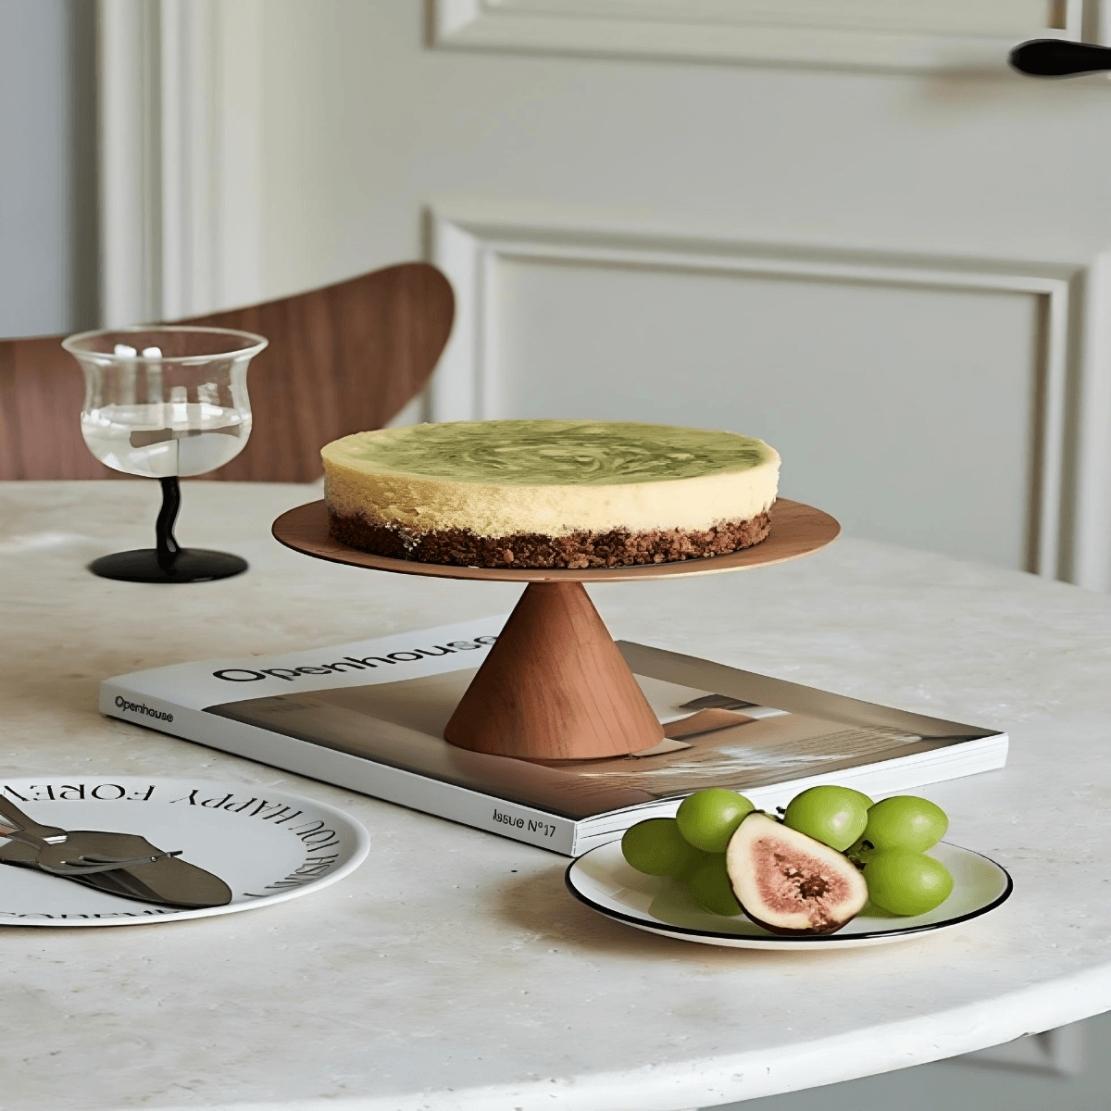 Elevated circle wood tray on dining table with cake